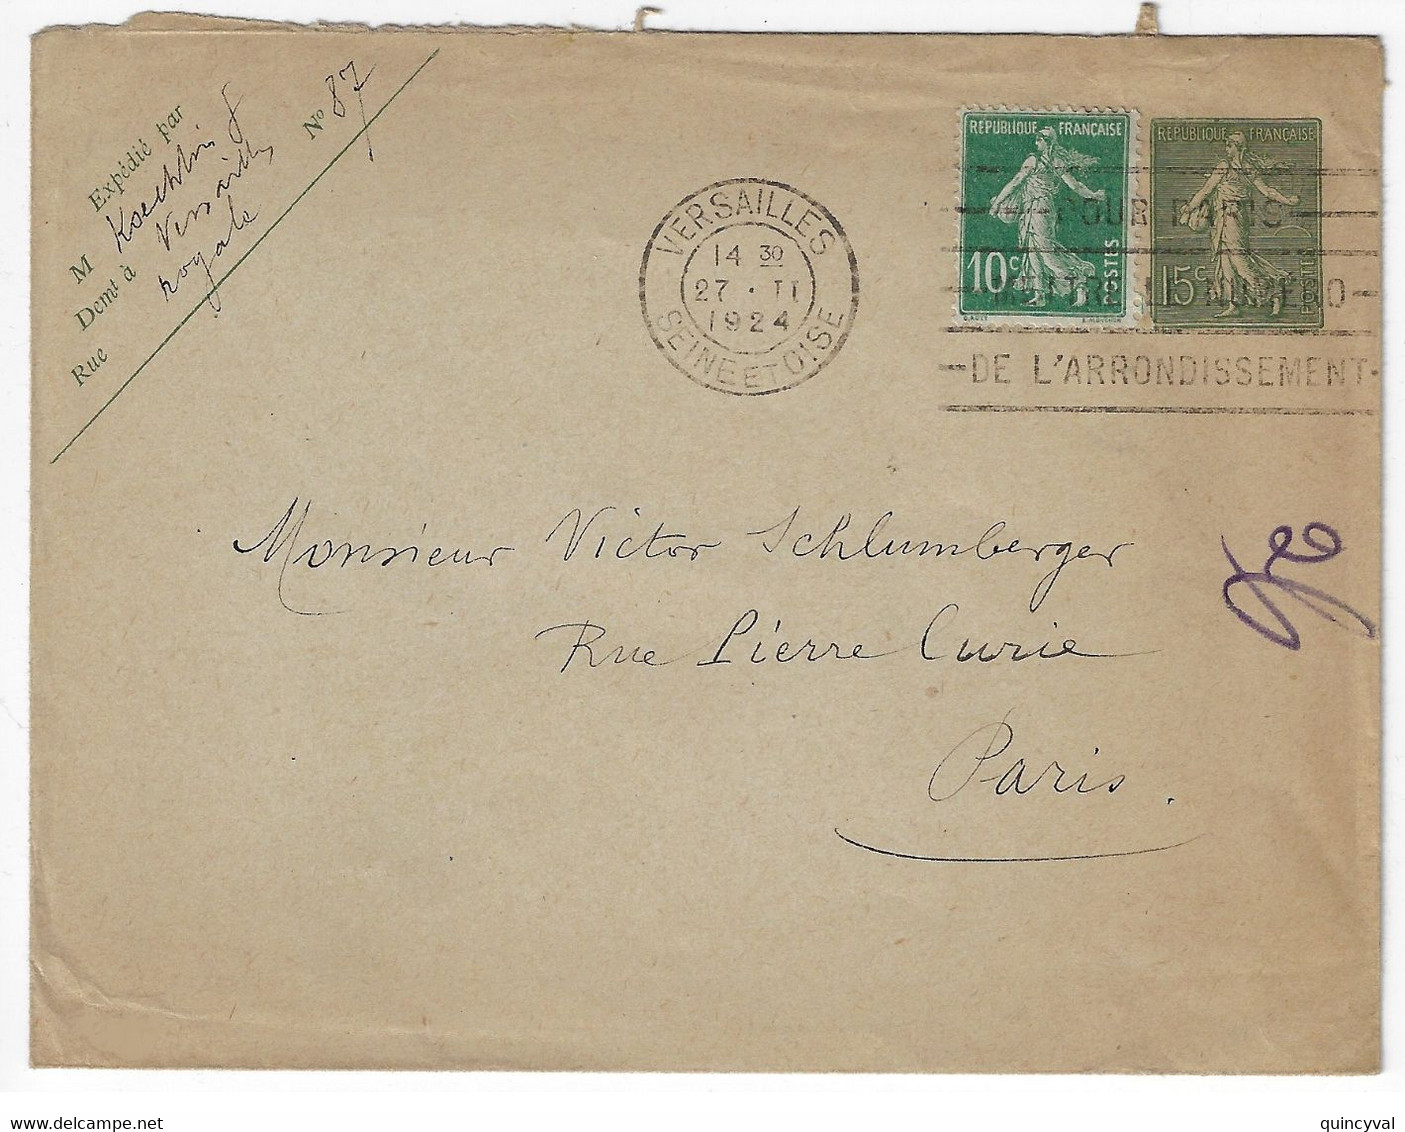 VERSAILLES Lettre Enveloppe 15c Entier Postal Mill 937 Storch B19 Complément 10c Semeuse Yv 130-E9 159 Ob 1924 - Standard Covers & Stamped On Demand (before 1995)